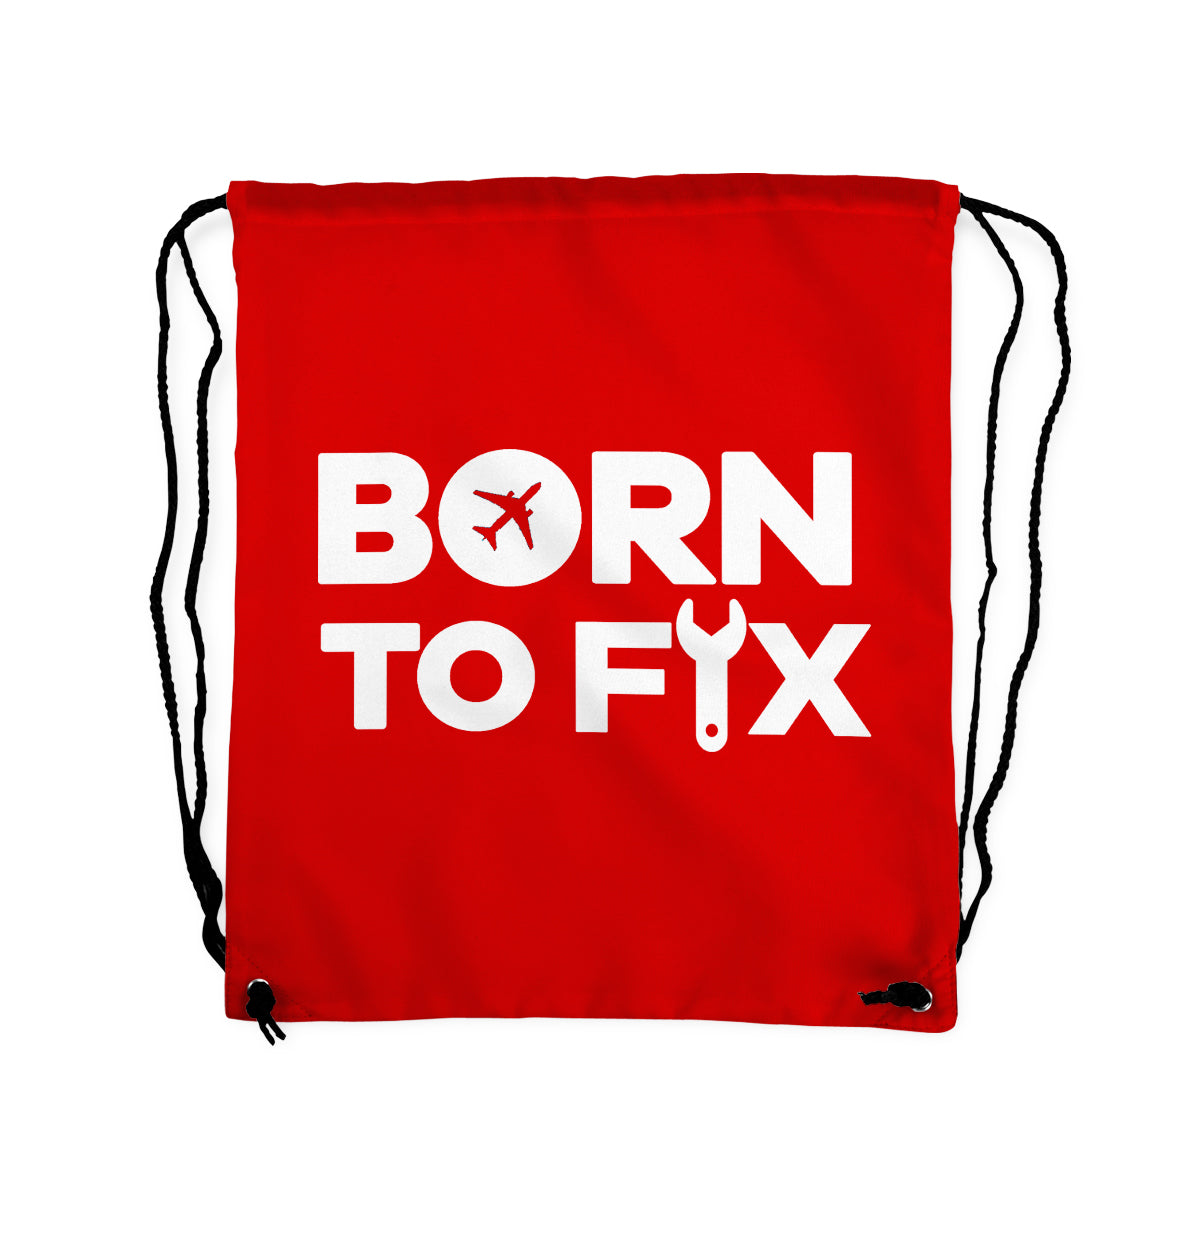 Born To Fix Airplanes Designed Drawstring Bags